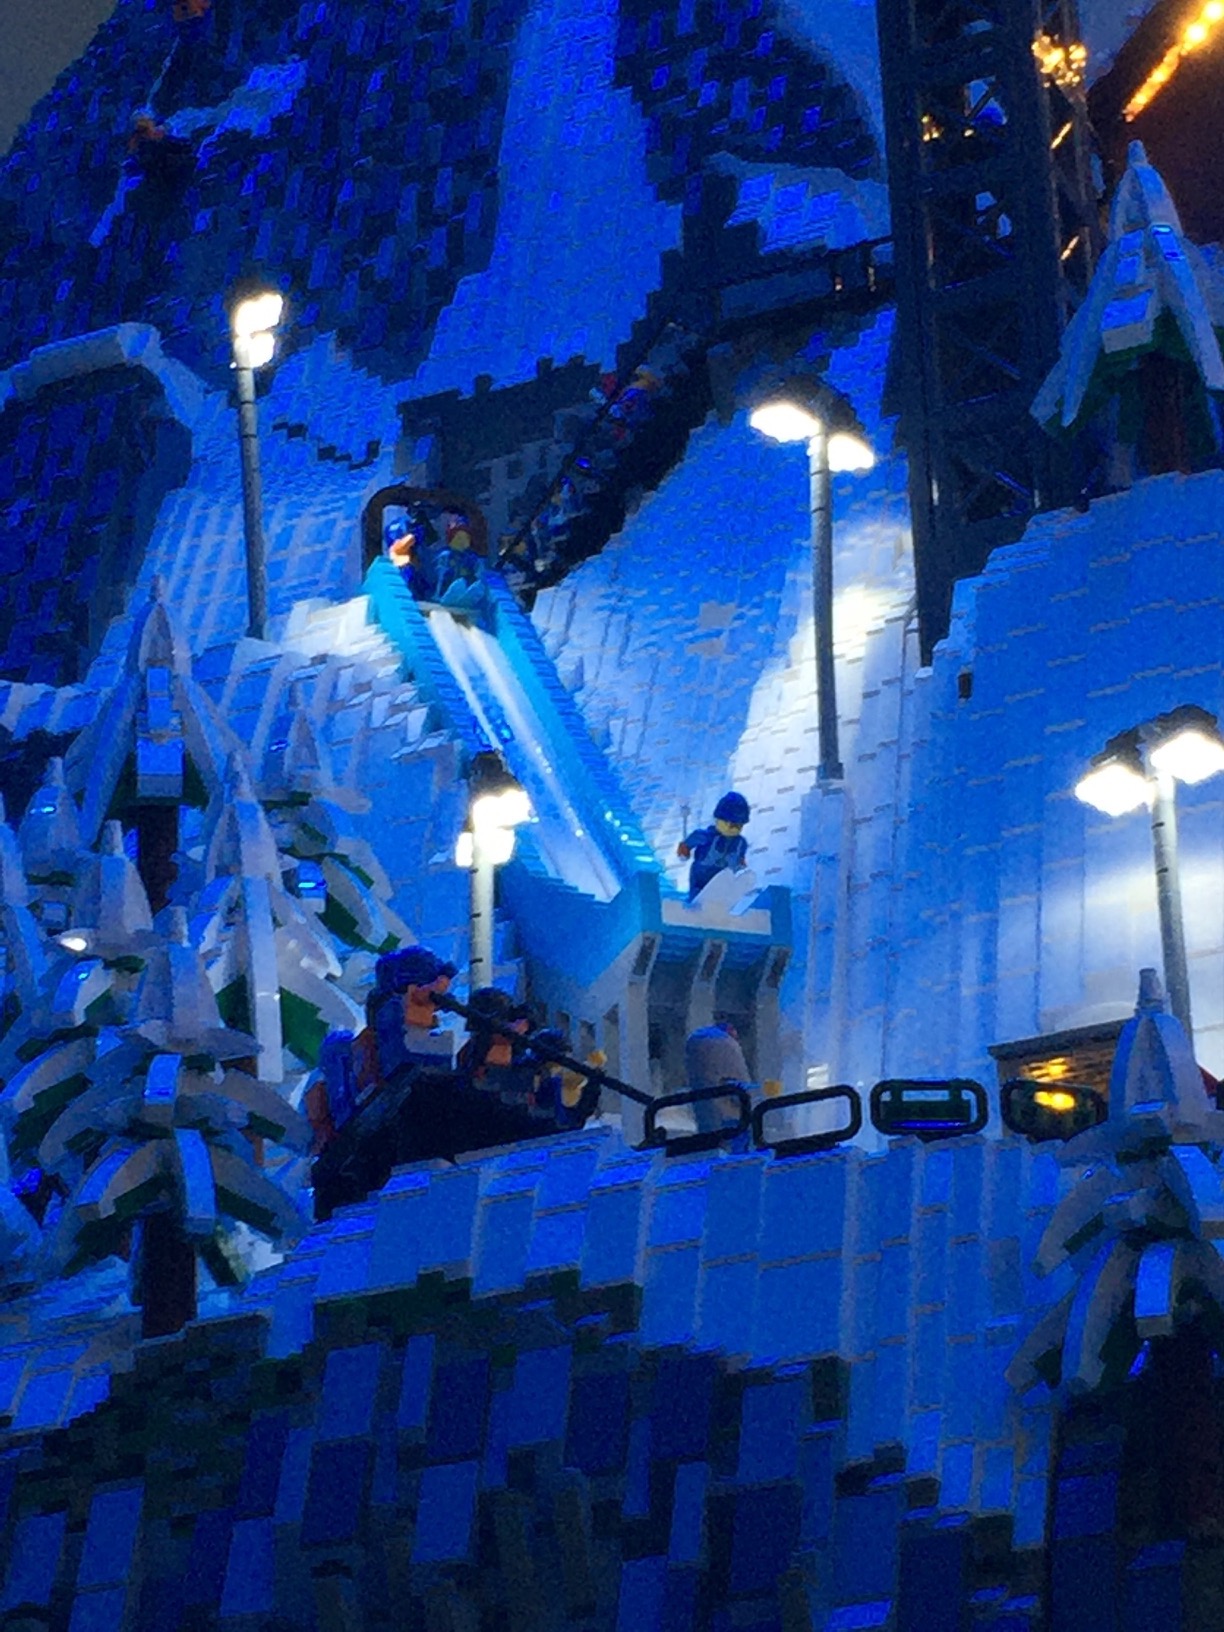 A LEGO skier about to take off from a ski jump.